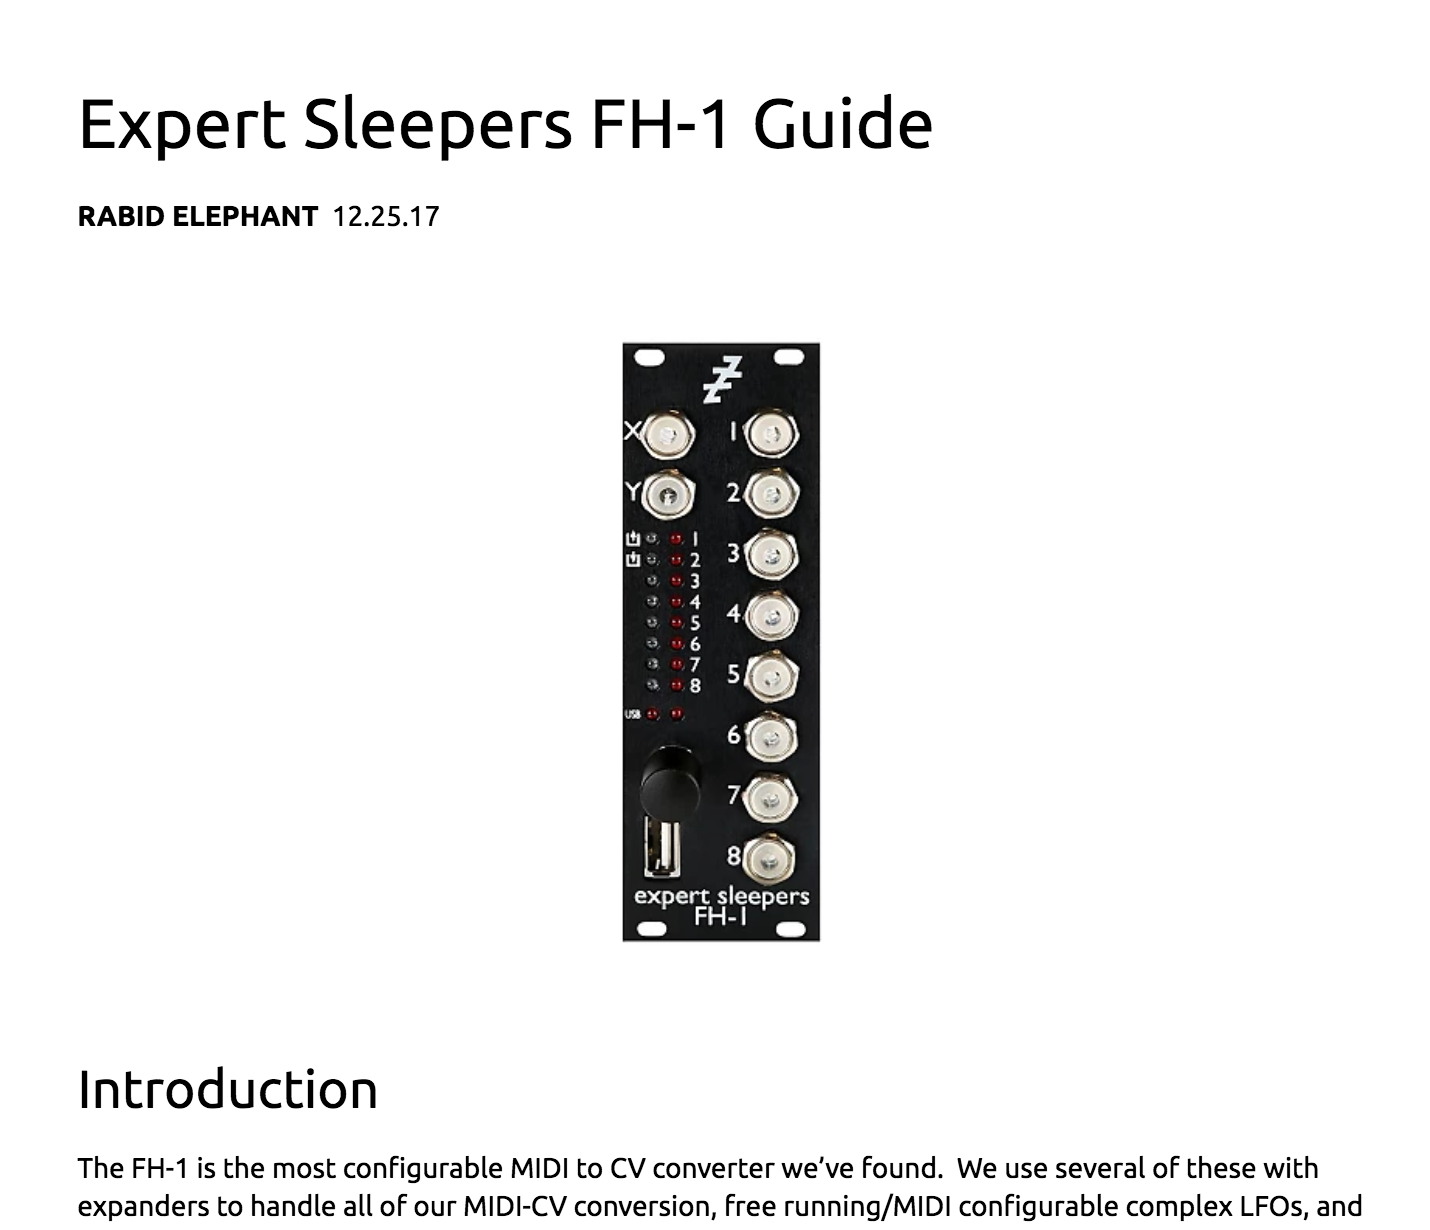 Expert Sleepers FH-1 Guide